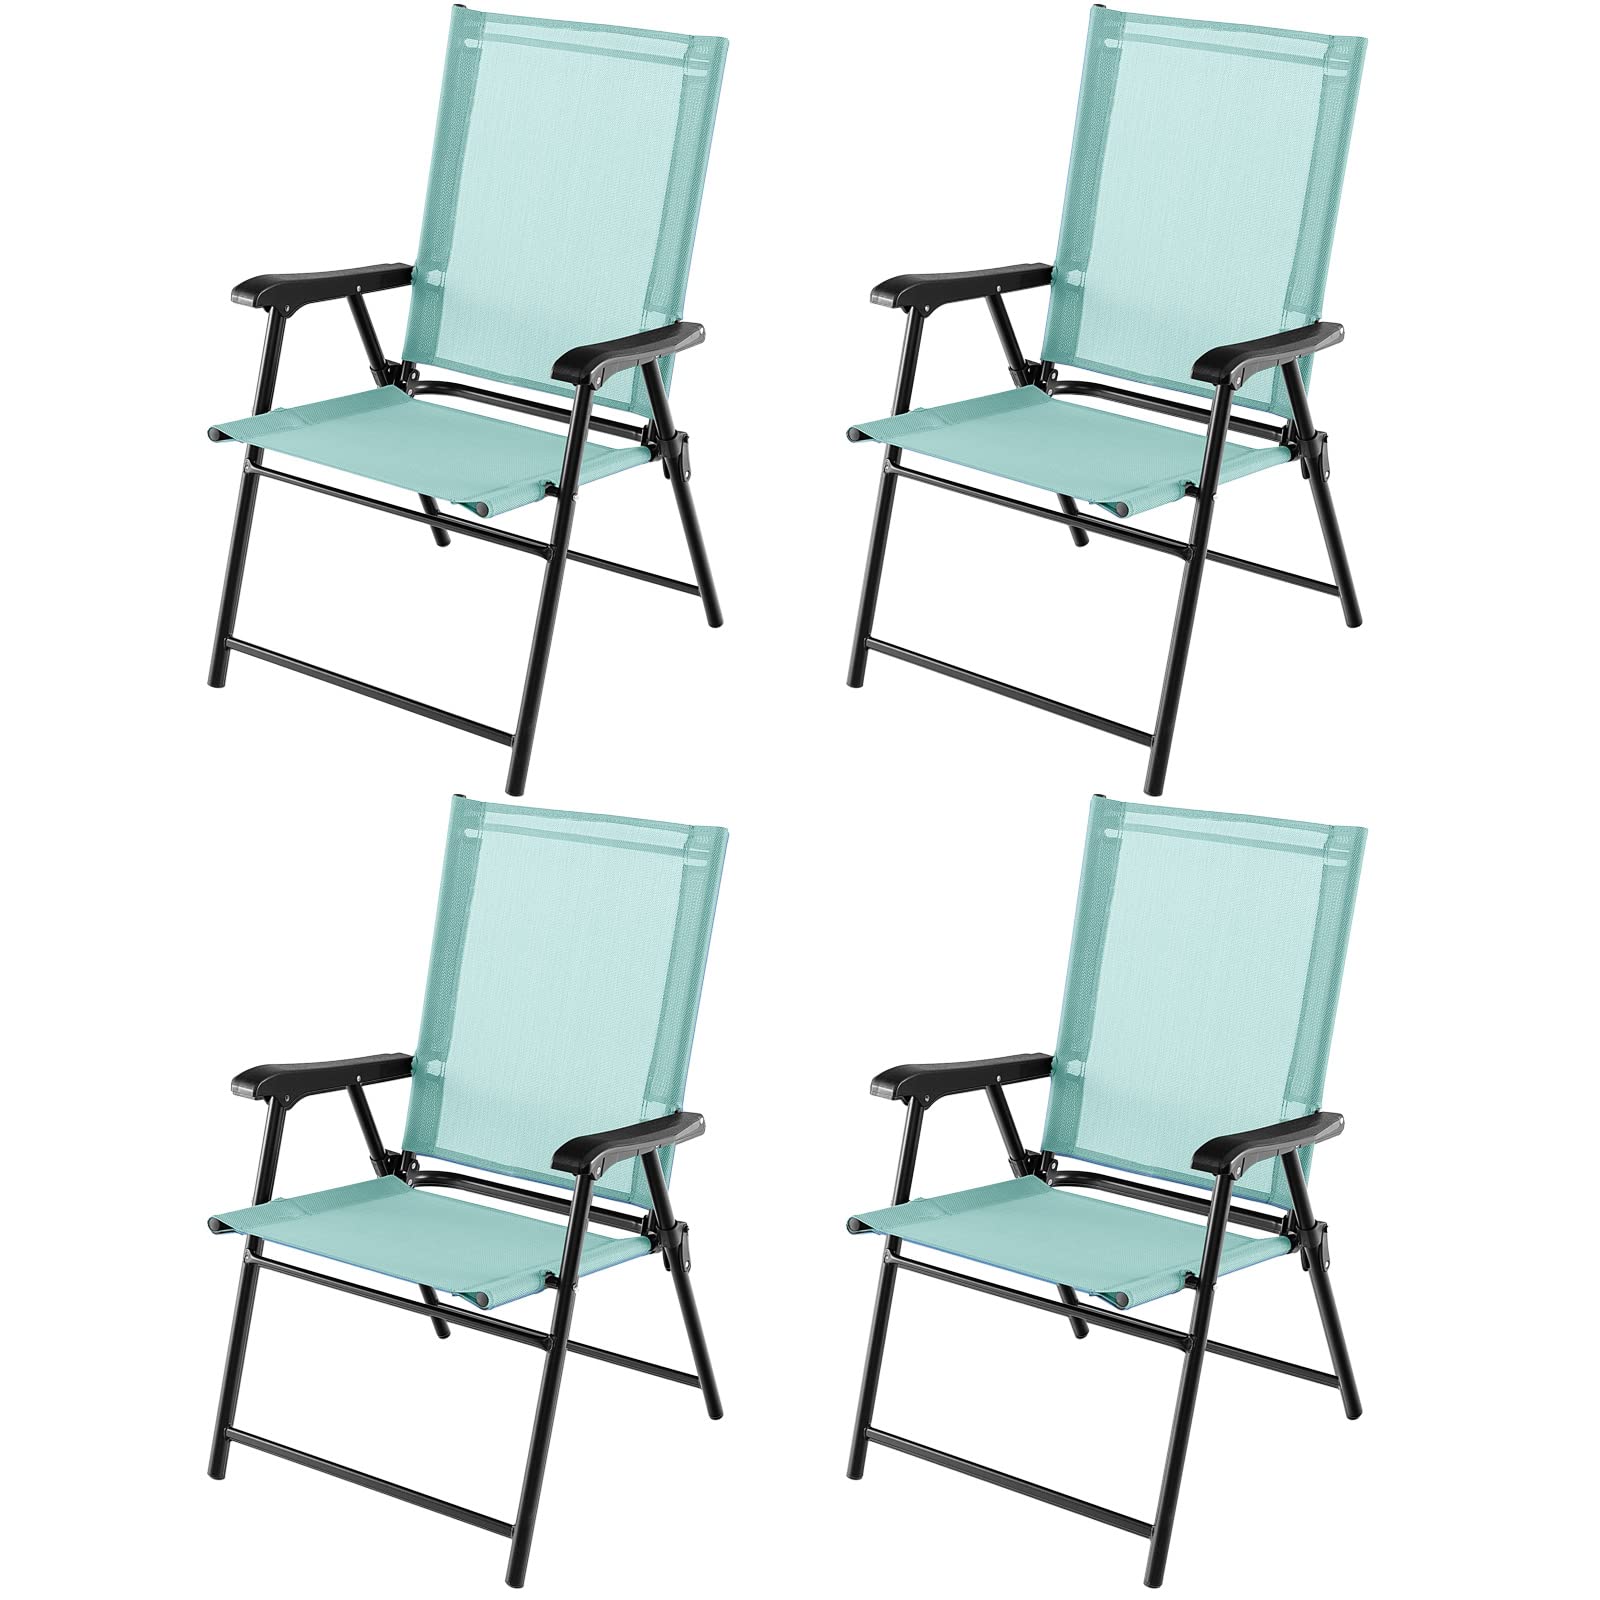 Giantex Patio Chairs Set of 2/4, Folding Patio Chairs for Deck Beach Camping Dining Picnic